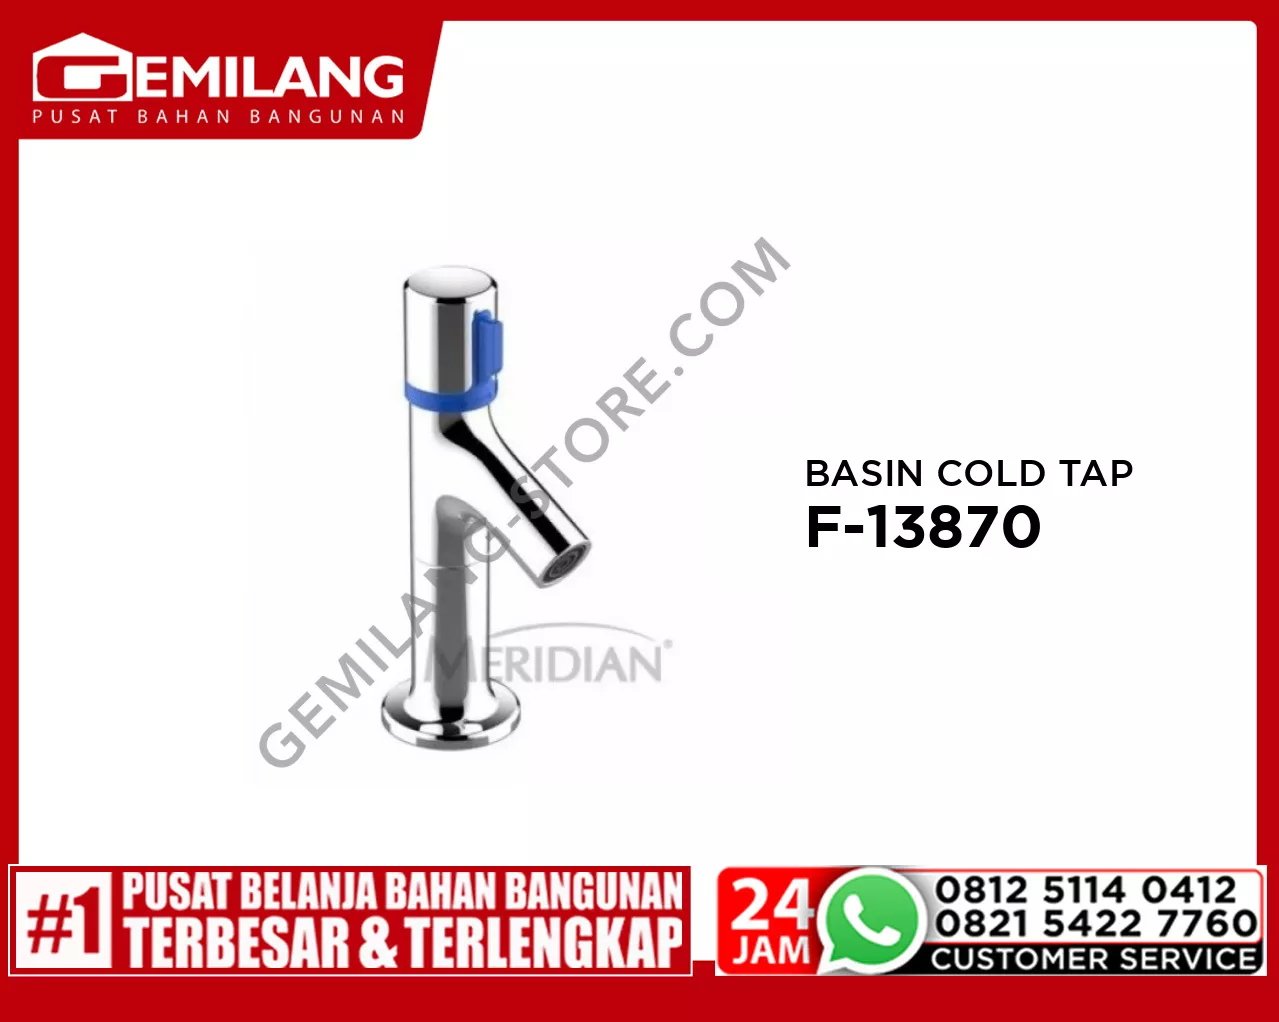 MERIDIAN BASIN COLD TAP F-13870